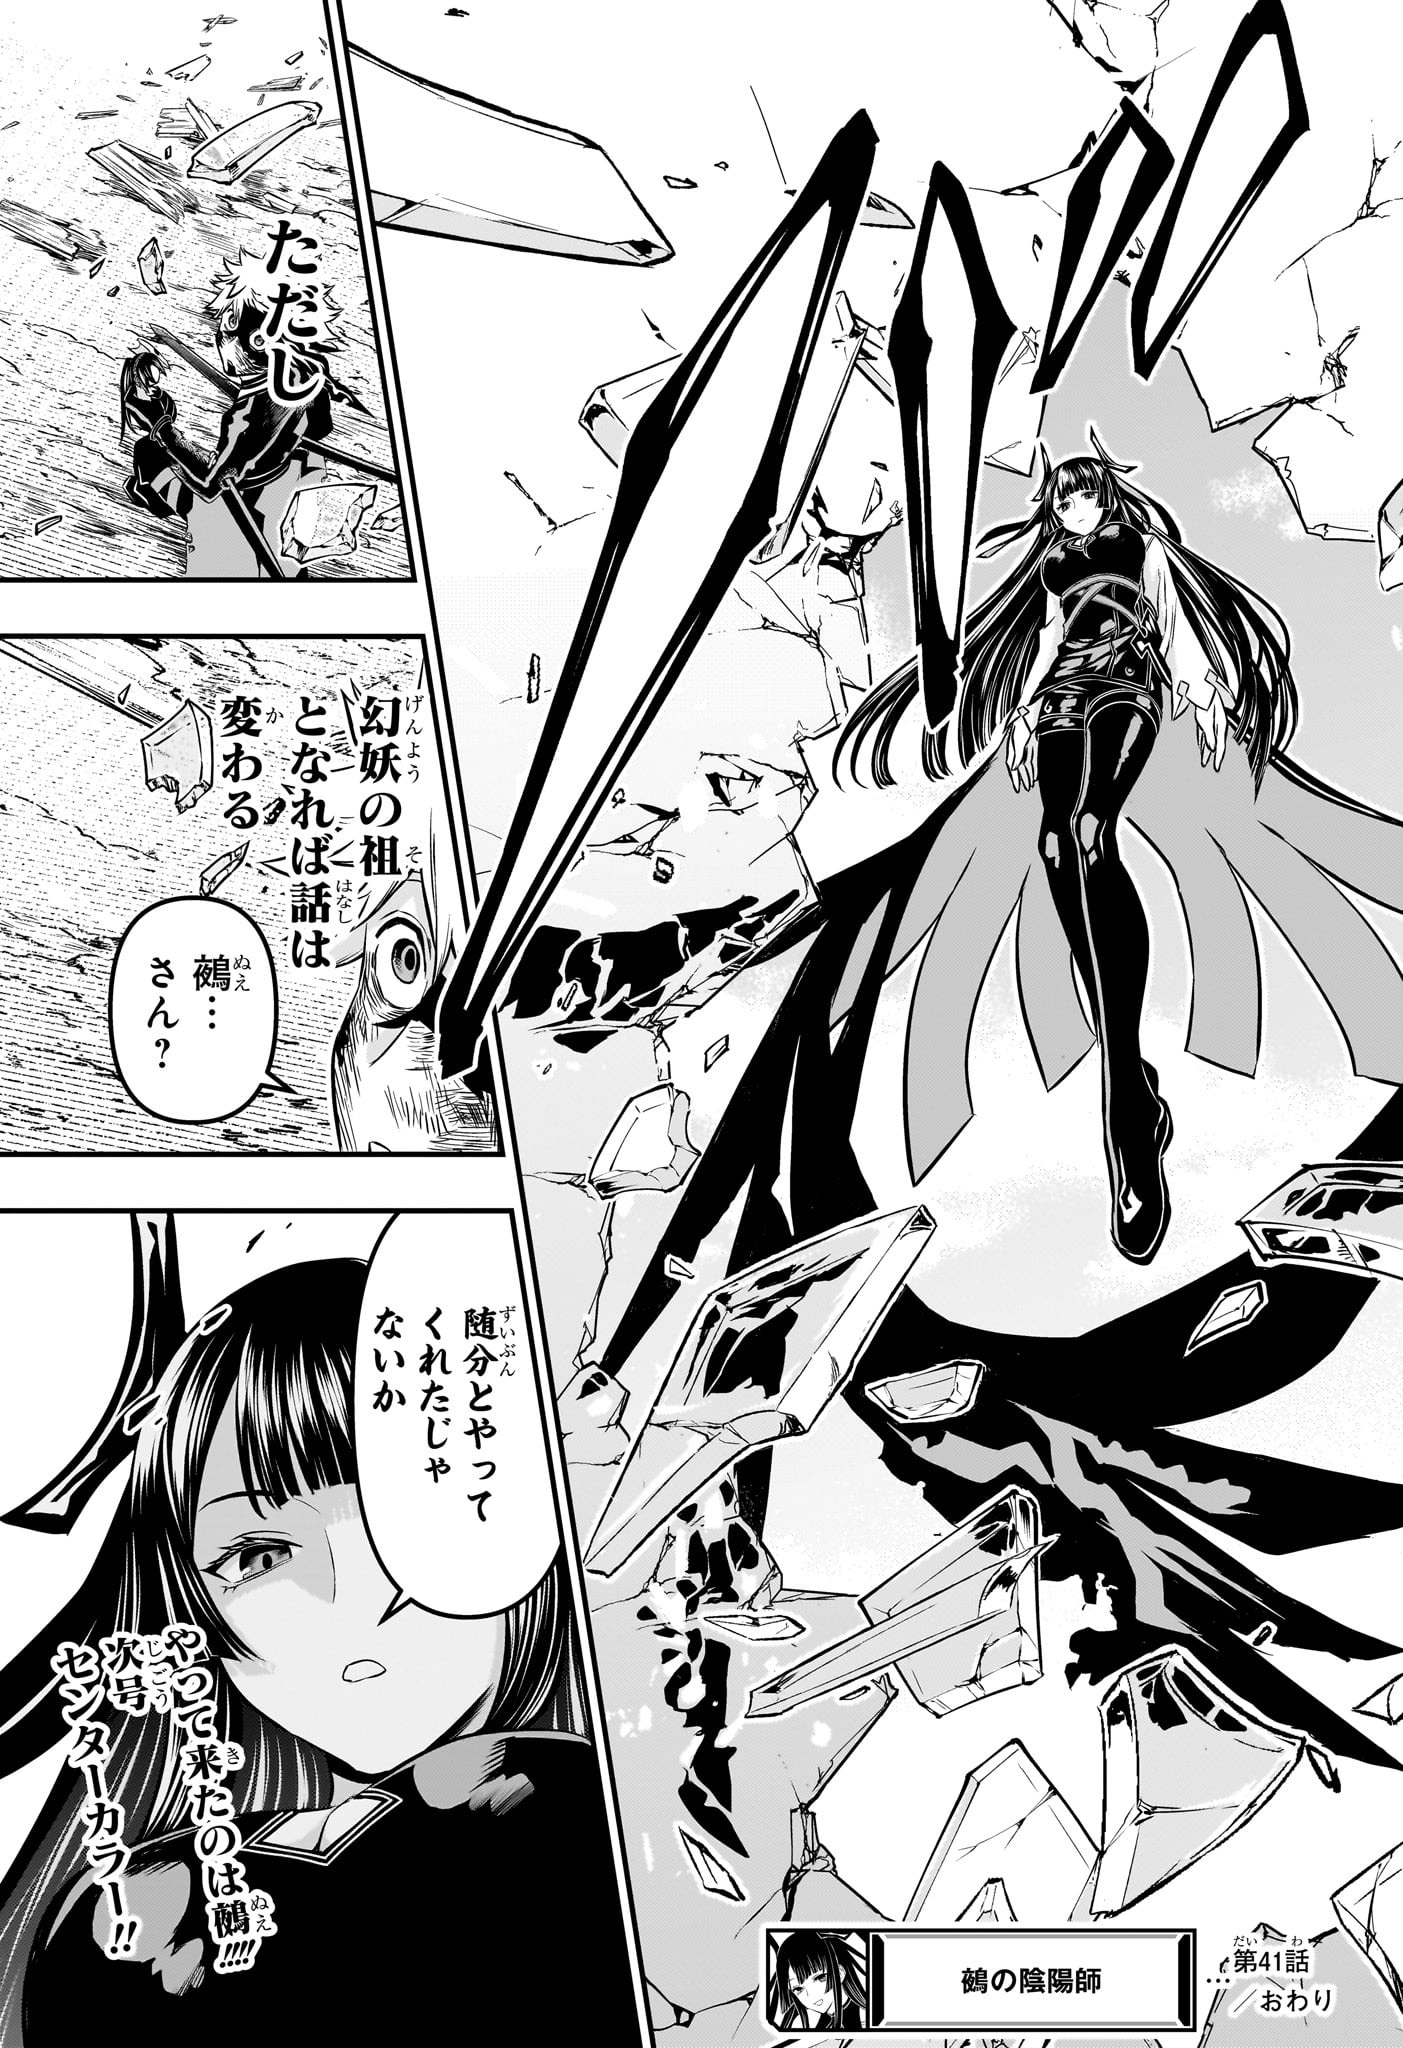 Nue no Onmyouji - Chapter 41 - Page 19